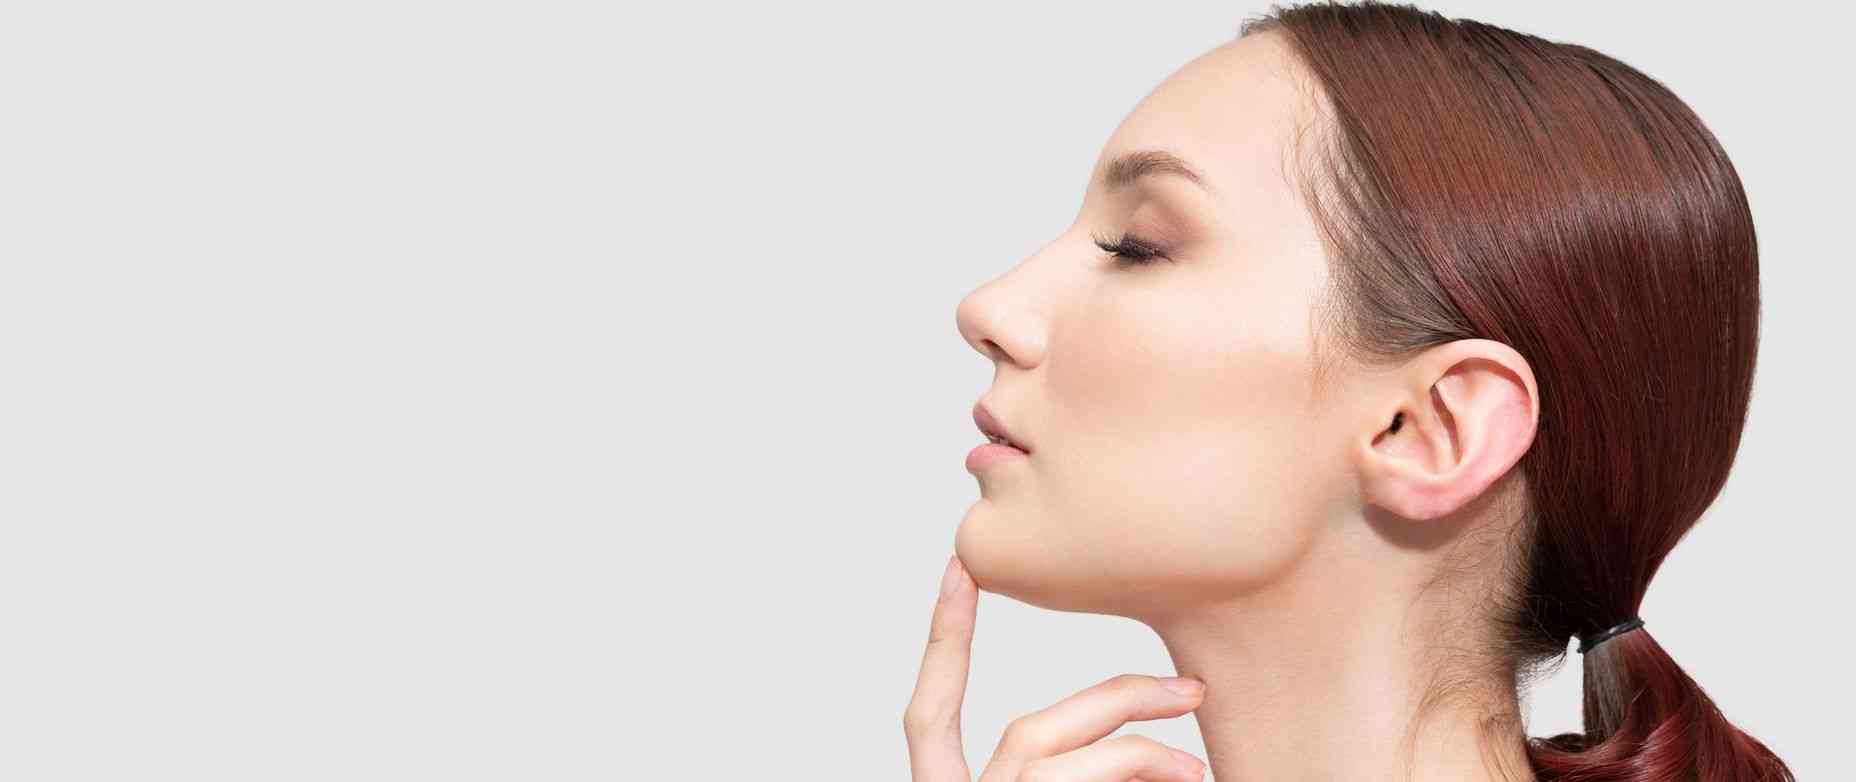 double chin causes and treatment image